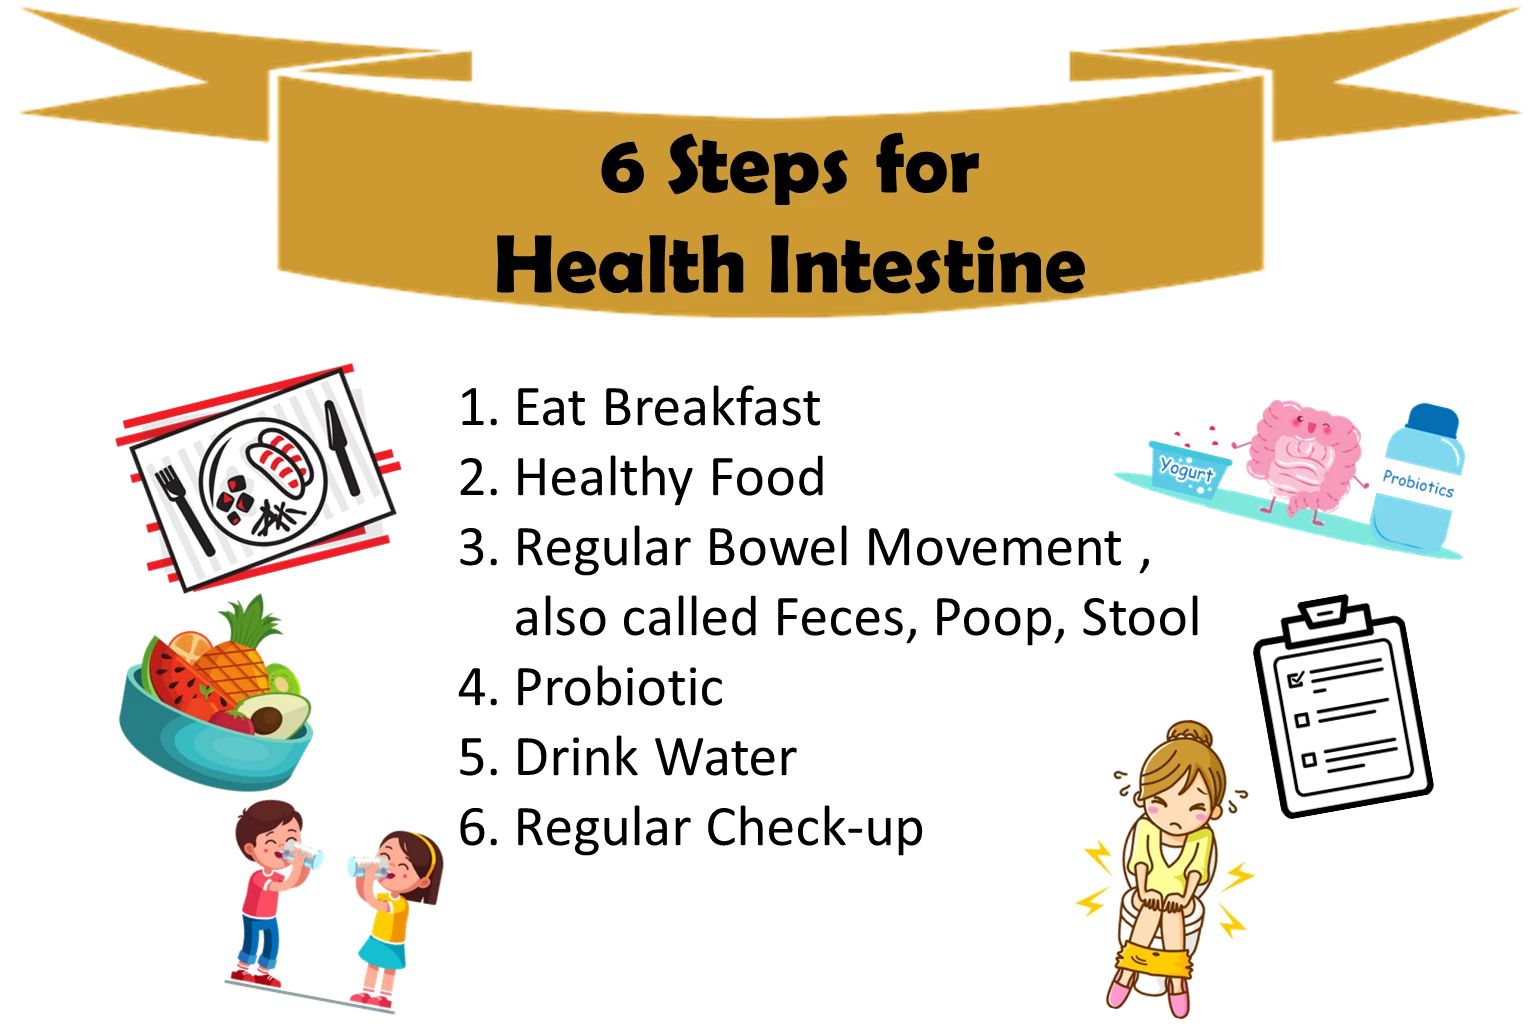 034153410321330-6-steps-for-health-intestine-content-1559285026764.png